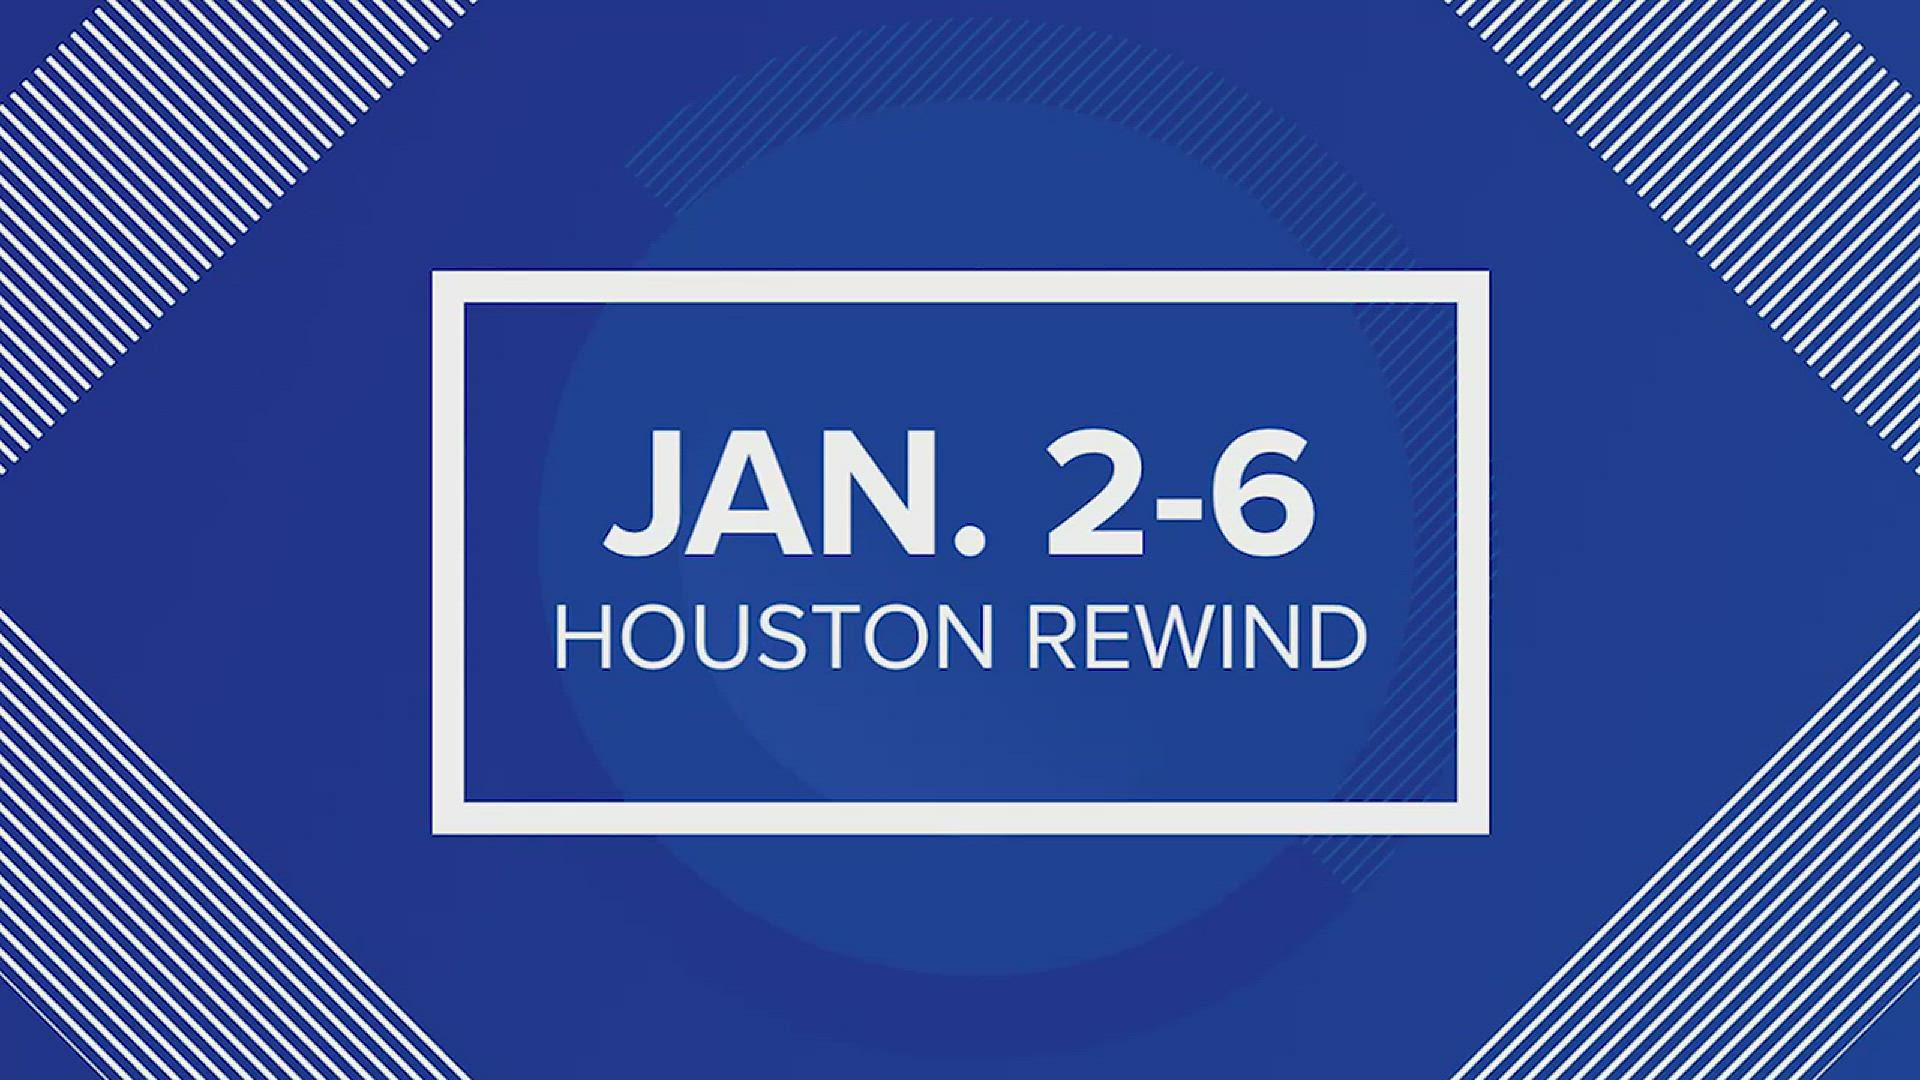 In every episode of the Houston Rewind, we get you caught up on stories you may have missed this week so you're ready for next week.